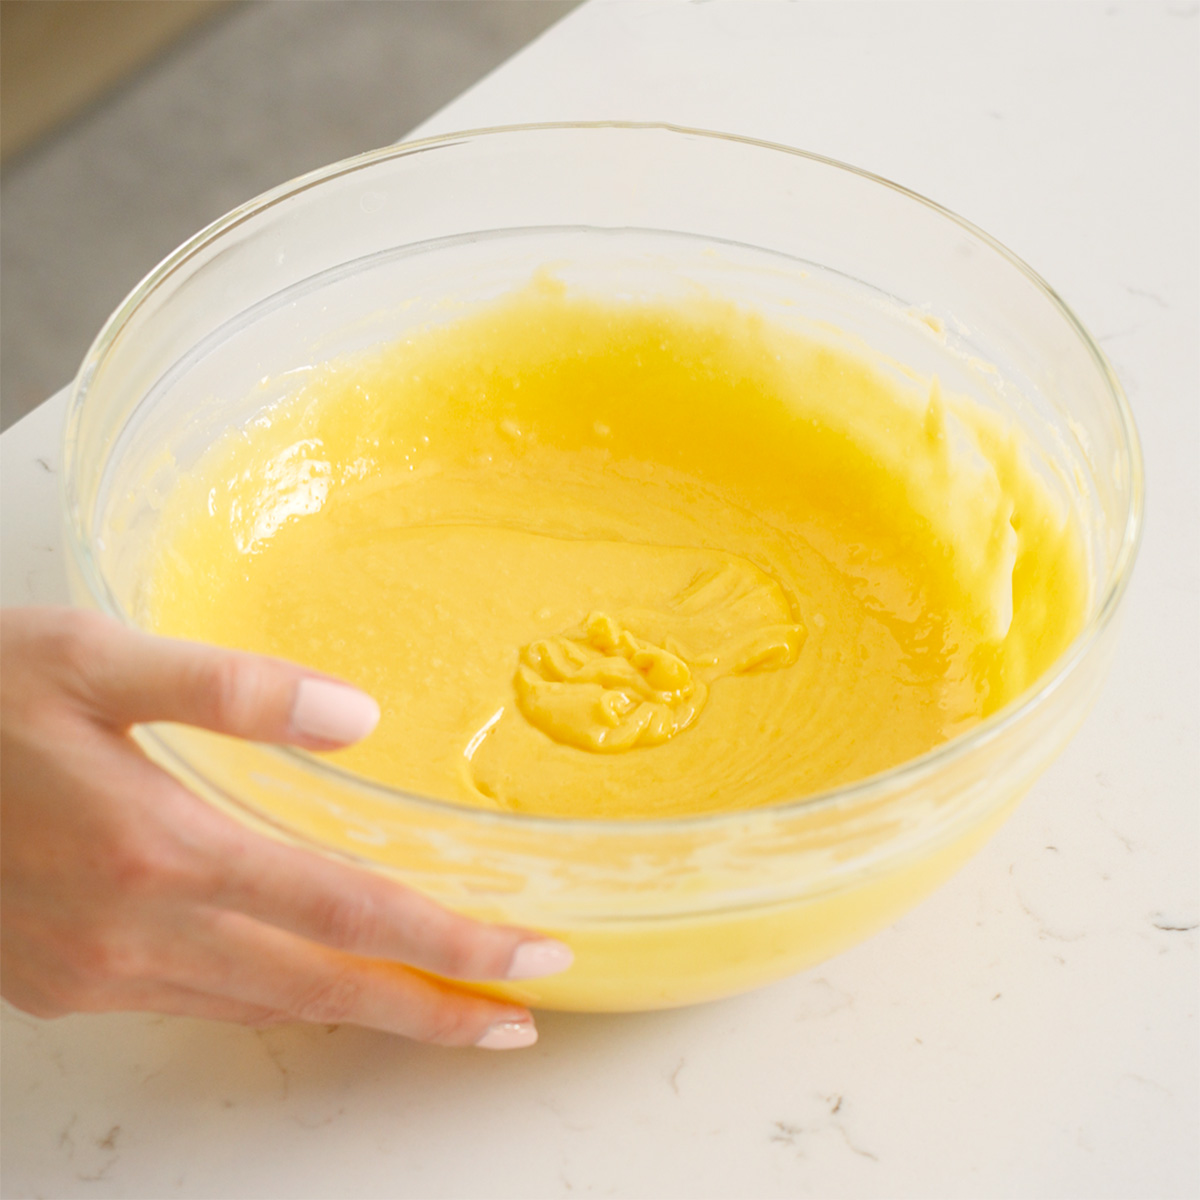 Egg yolks combined with a flour mixture for making a cake batter.